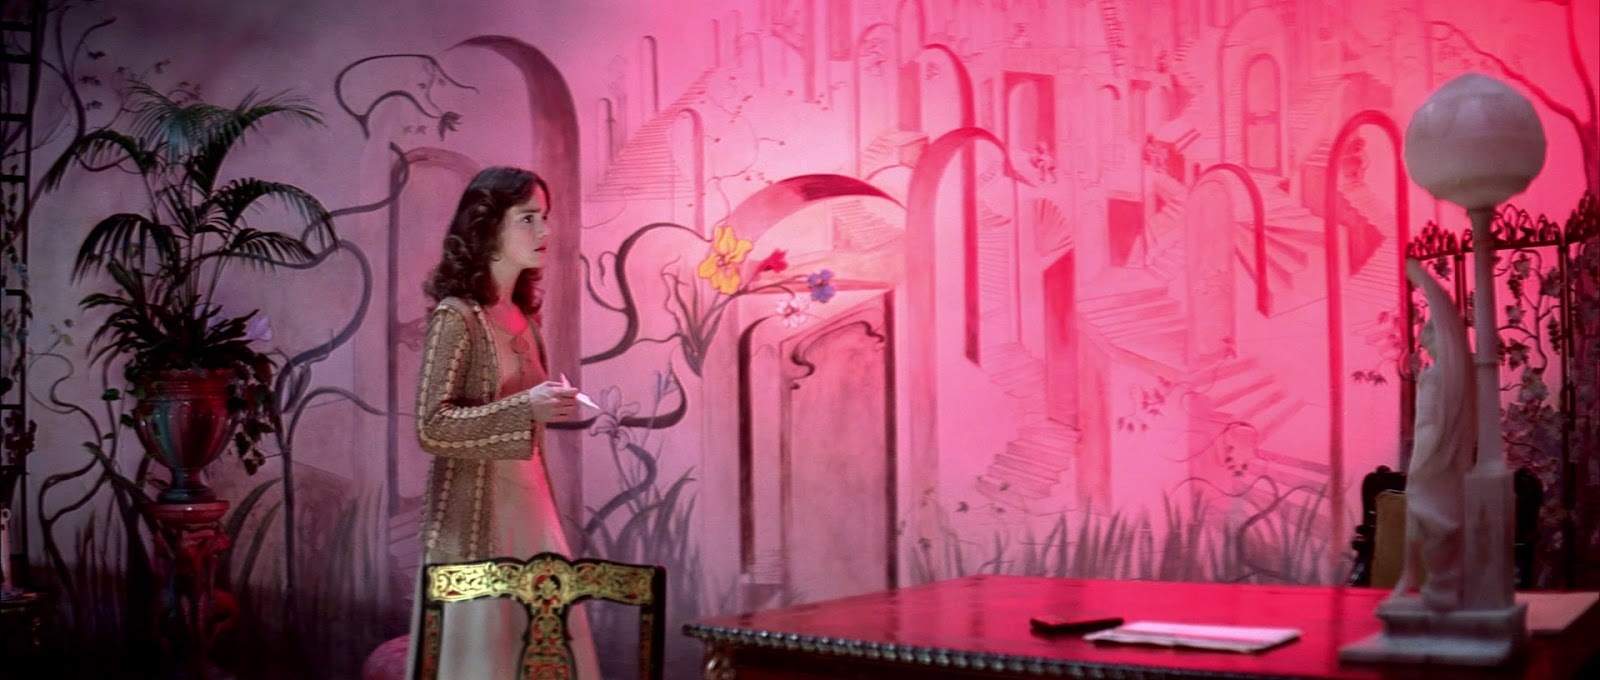 Suspiria' Remake Director Took Out What Everyone Likes About